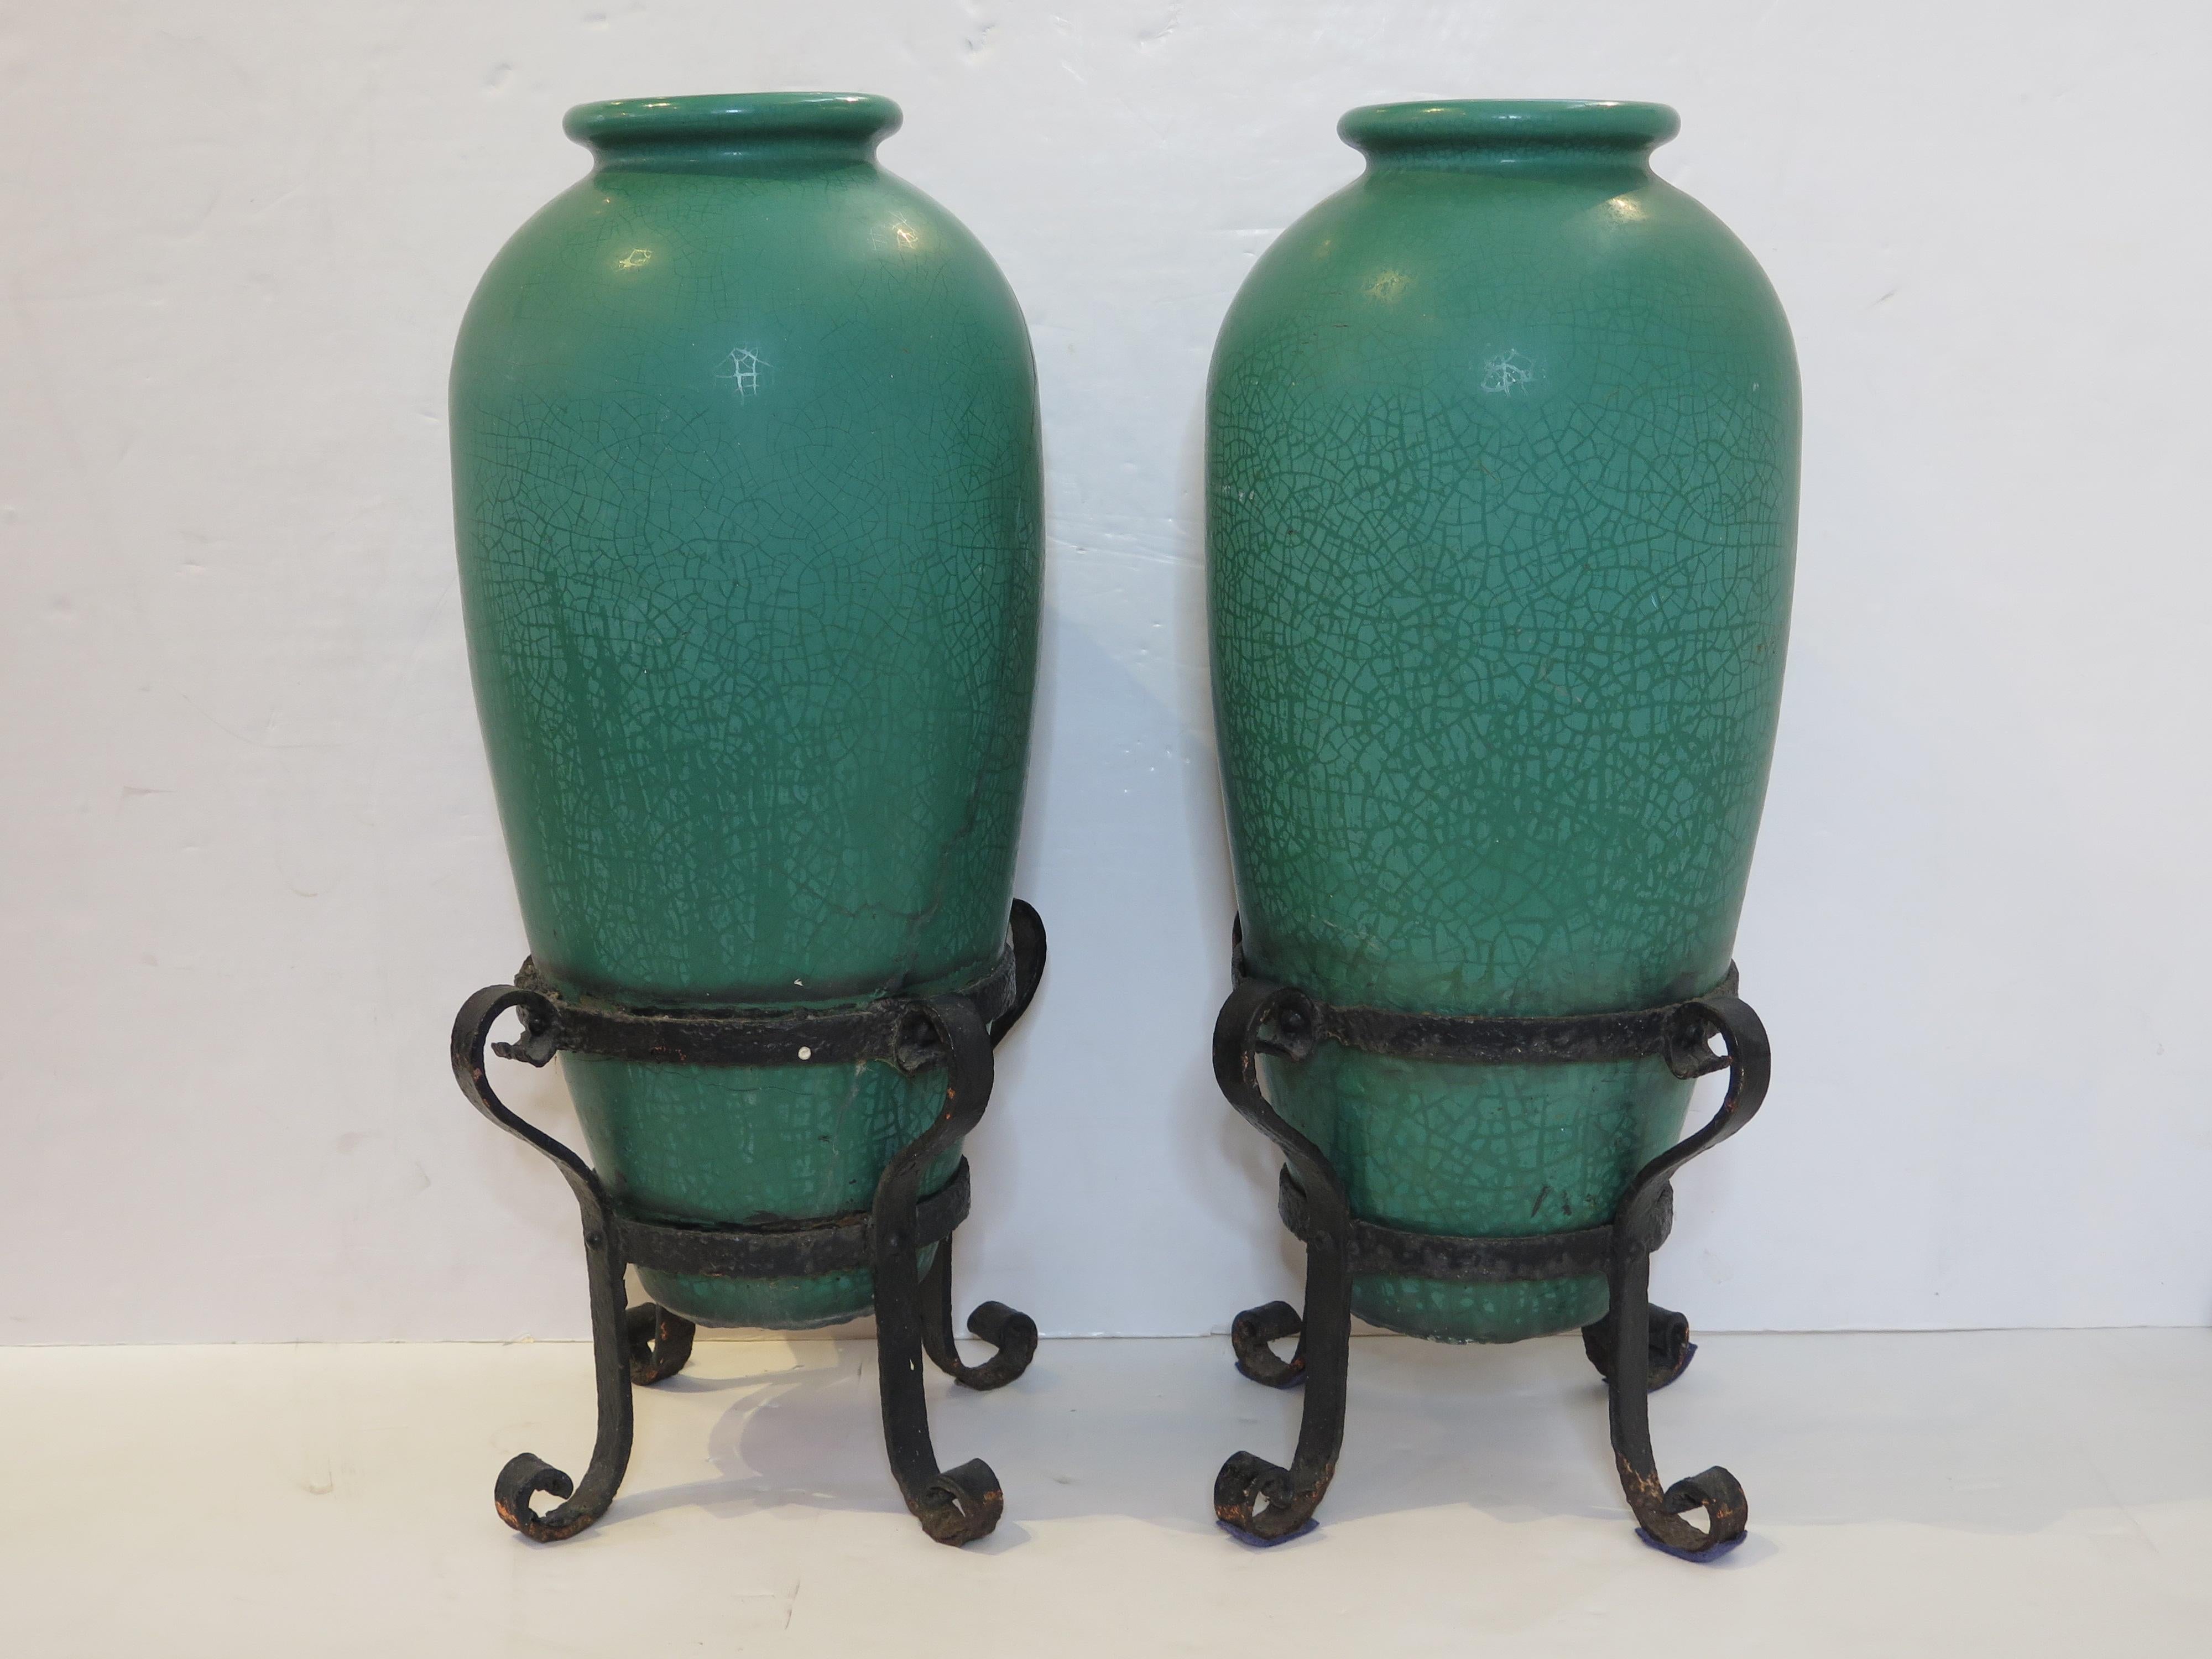 A Pair of Galloway Pottery Crackled Glaze Urns with Iron Stands 7